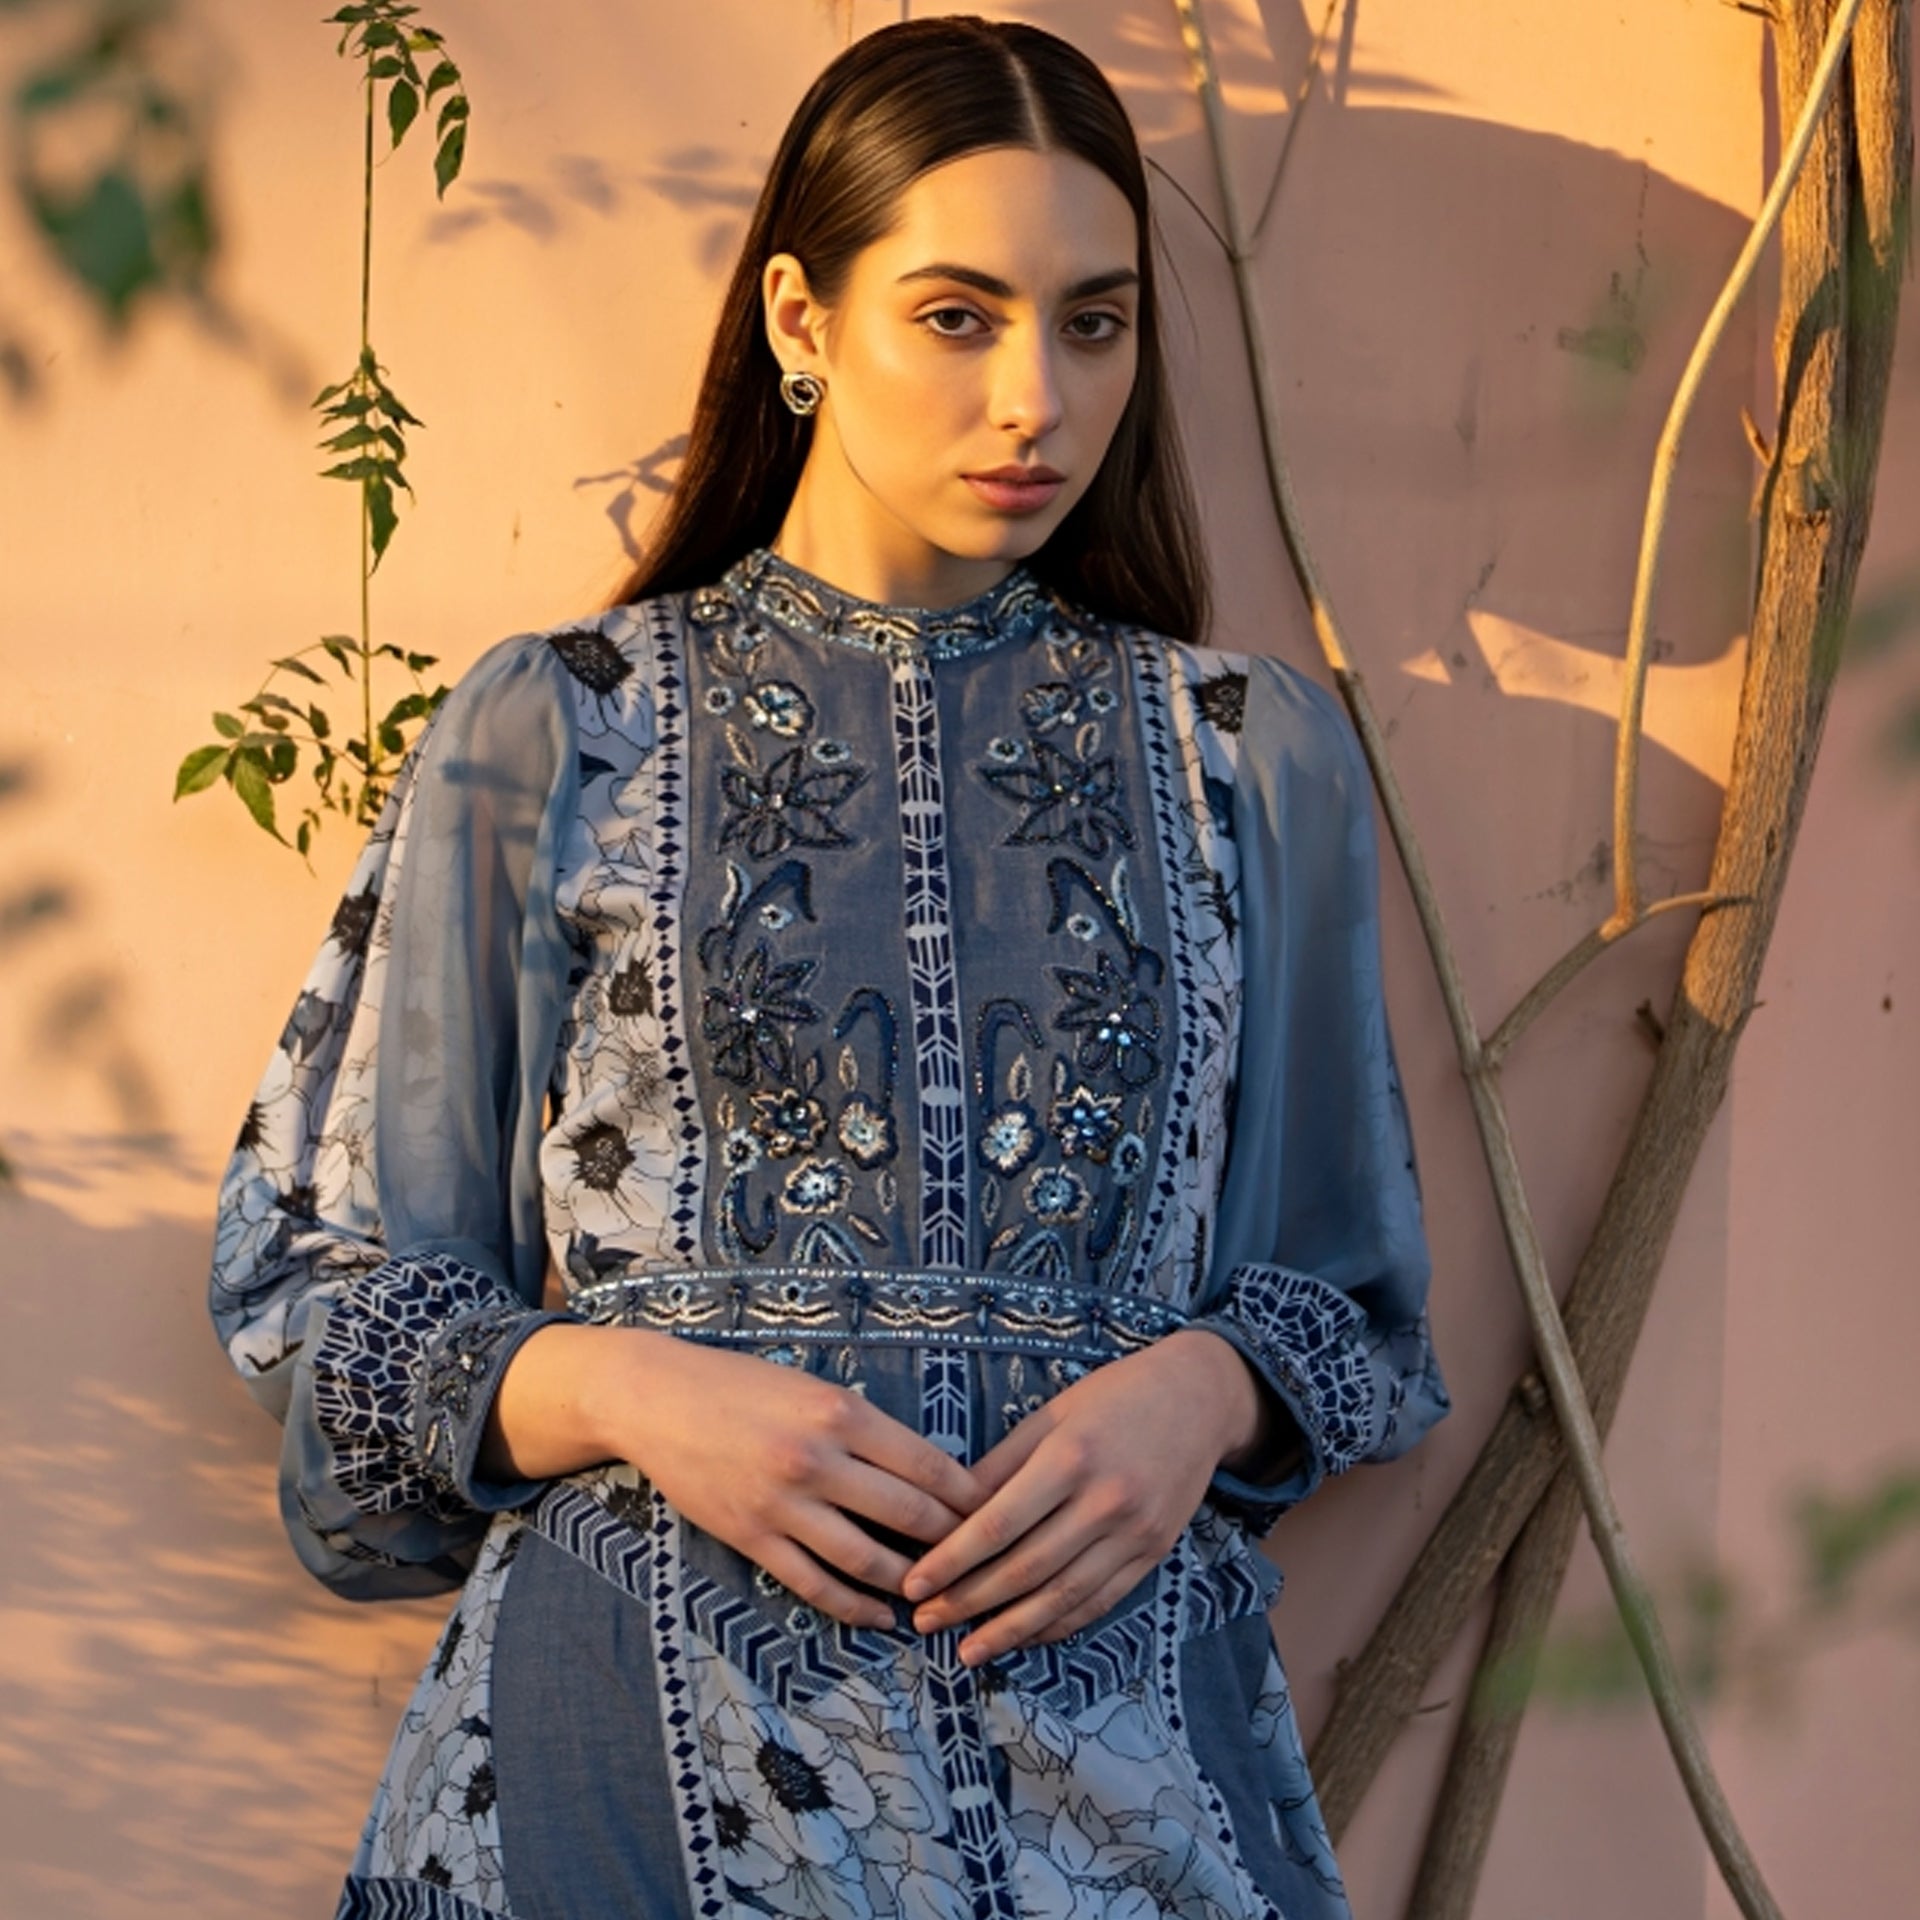 Blue Embroidery Dress with Chiffon Long Sleeves From Shalky